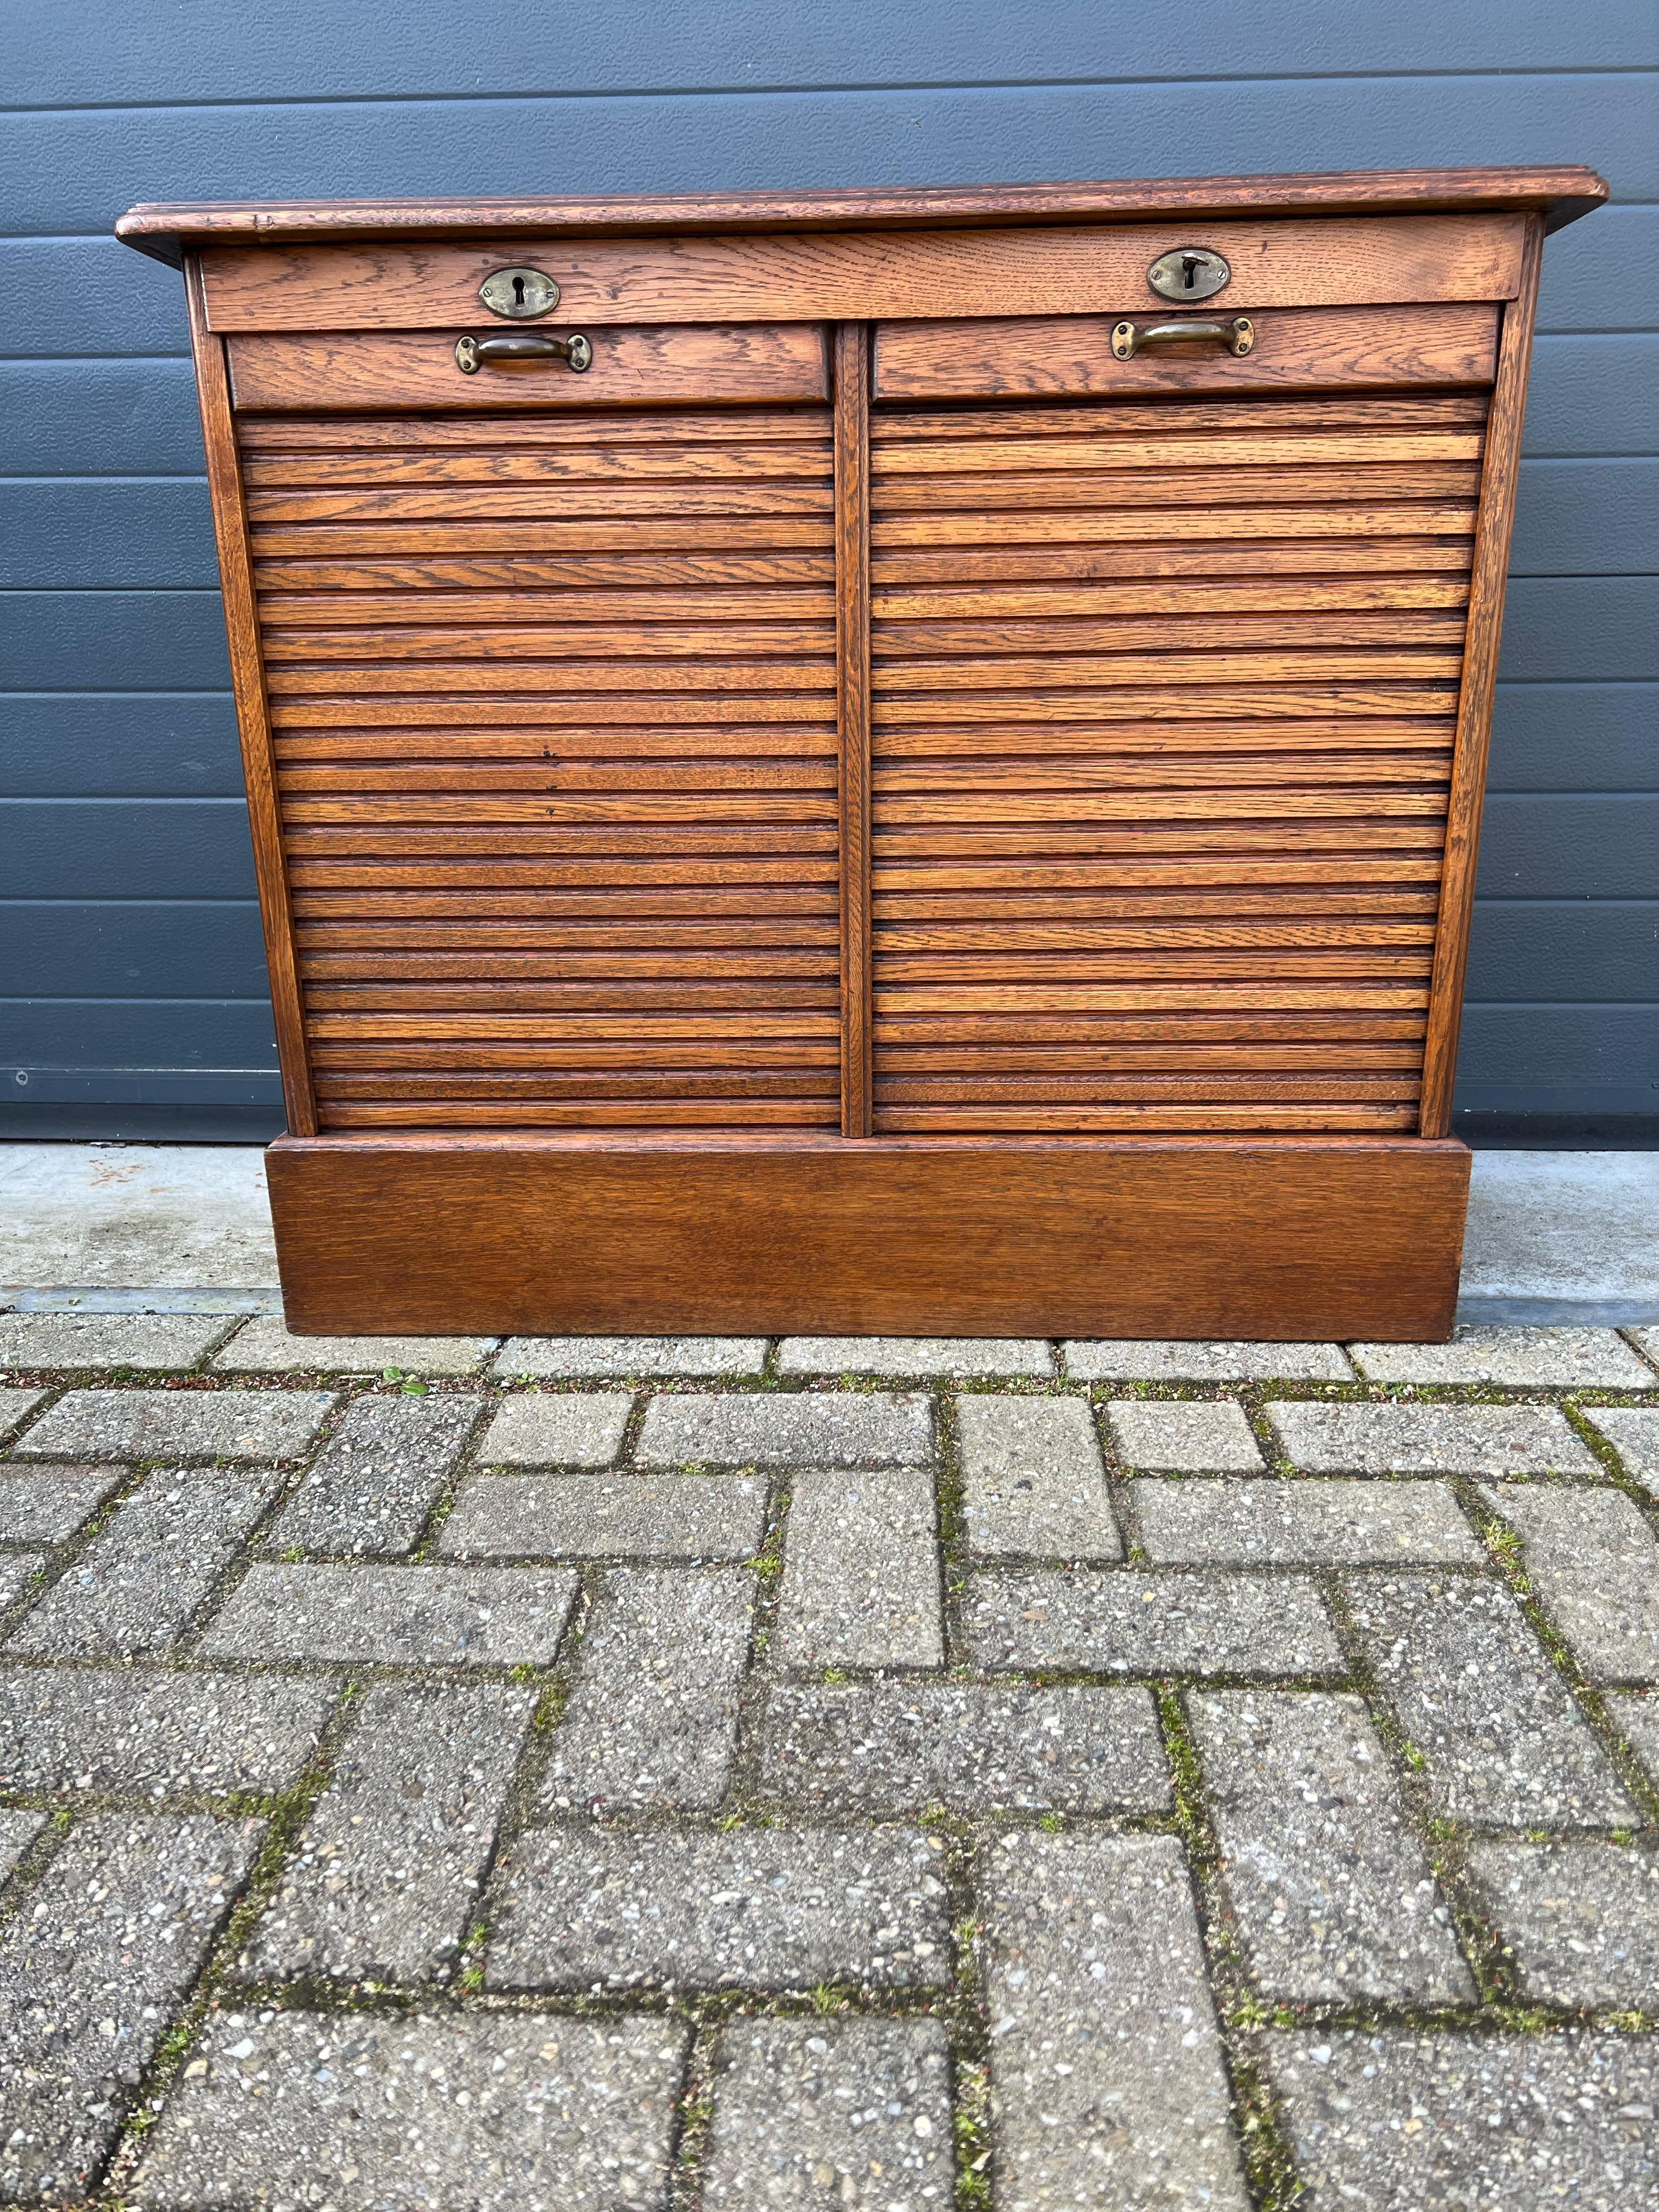 Practical Dutch Arts & Crafts Filing Cabinet with Double Roller Door and Drawers 2